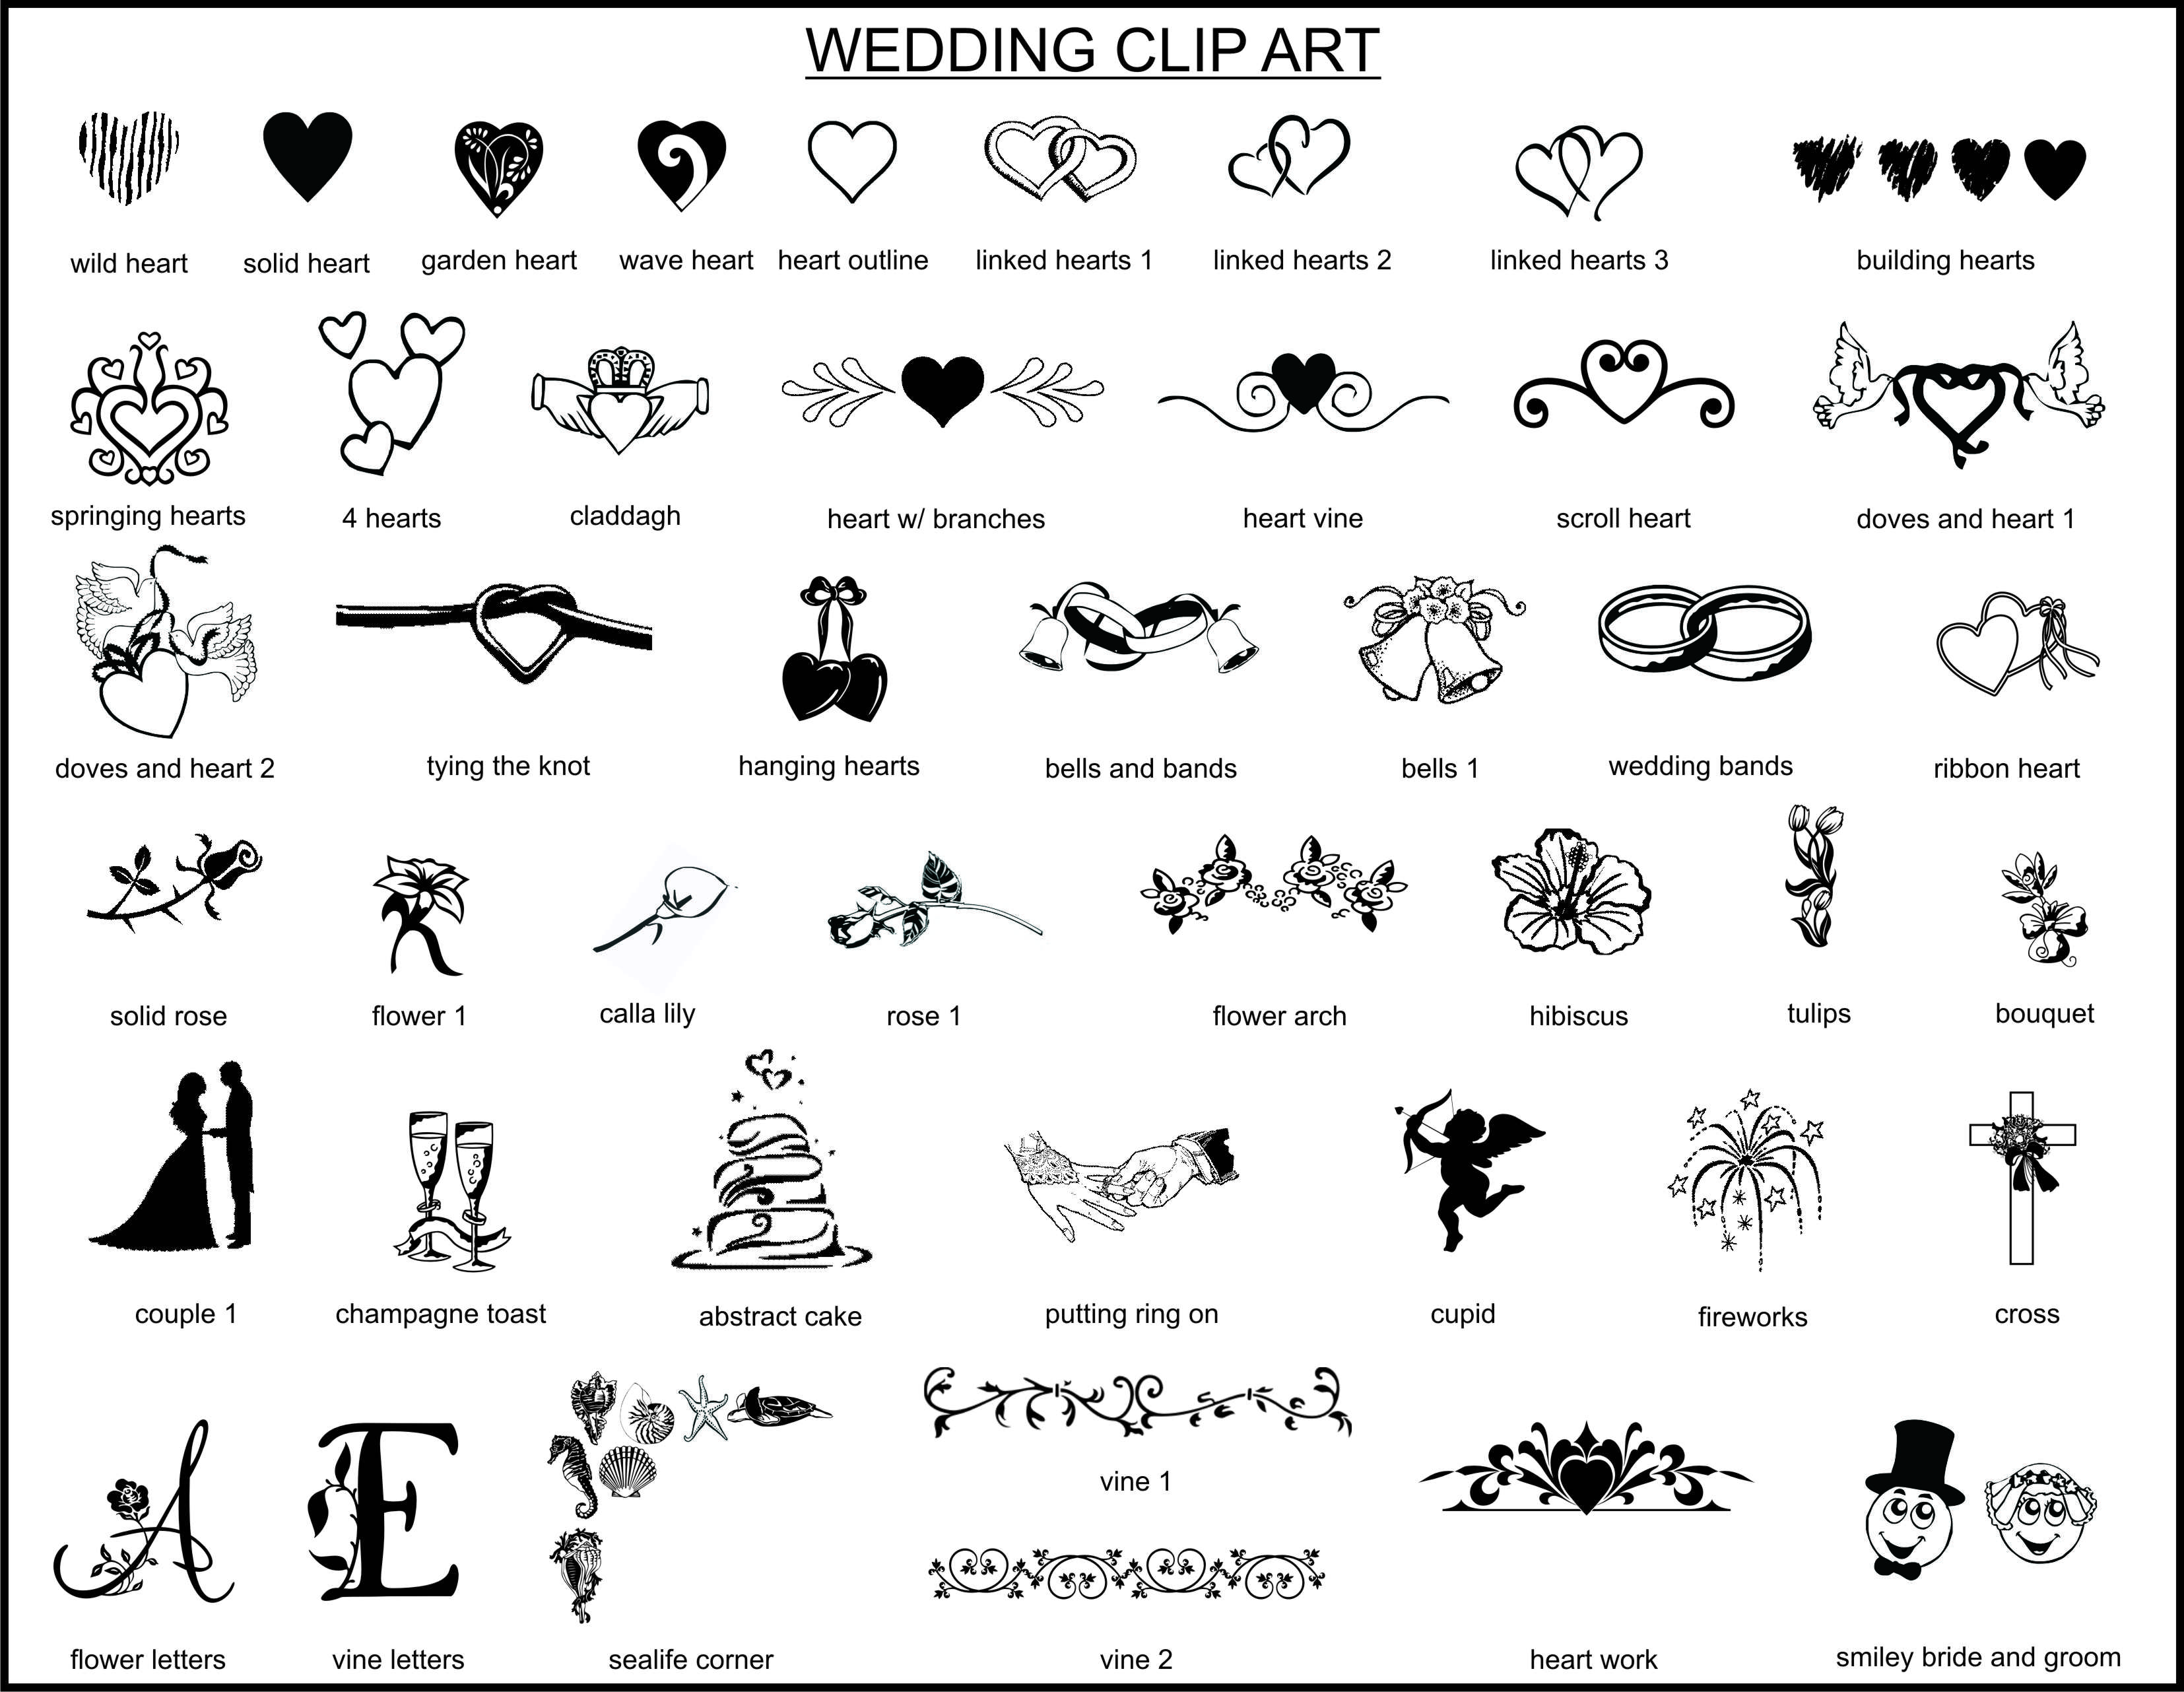 19  Pics In Our Database For   Wedding Reception Clipart